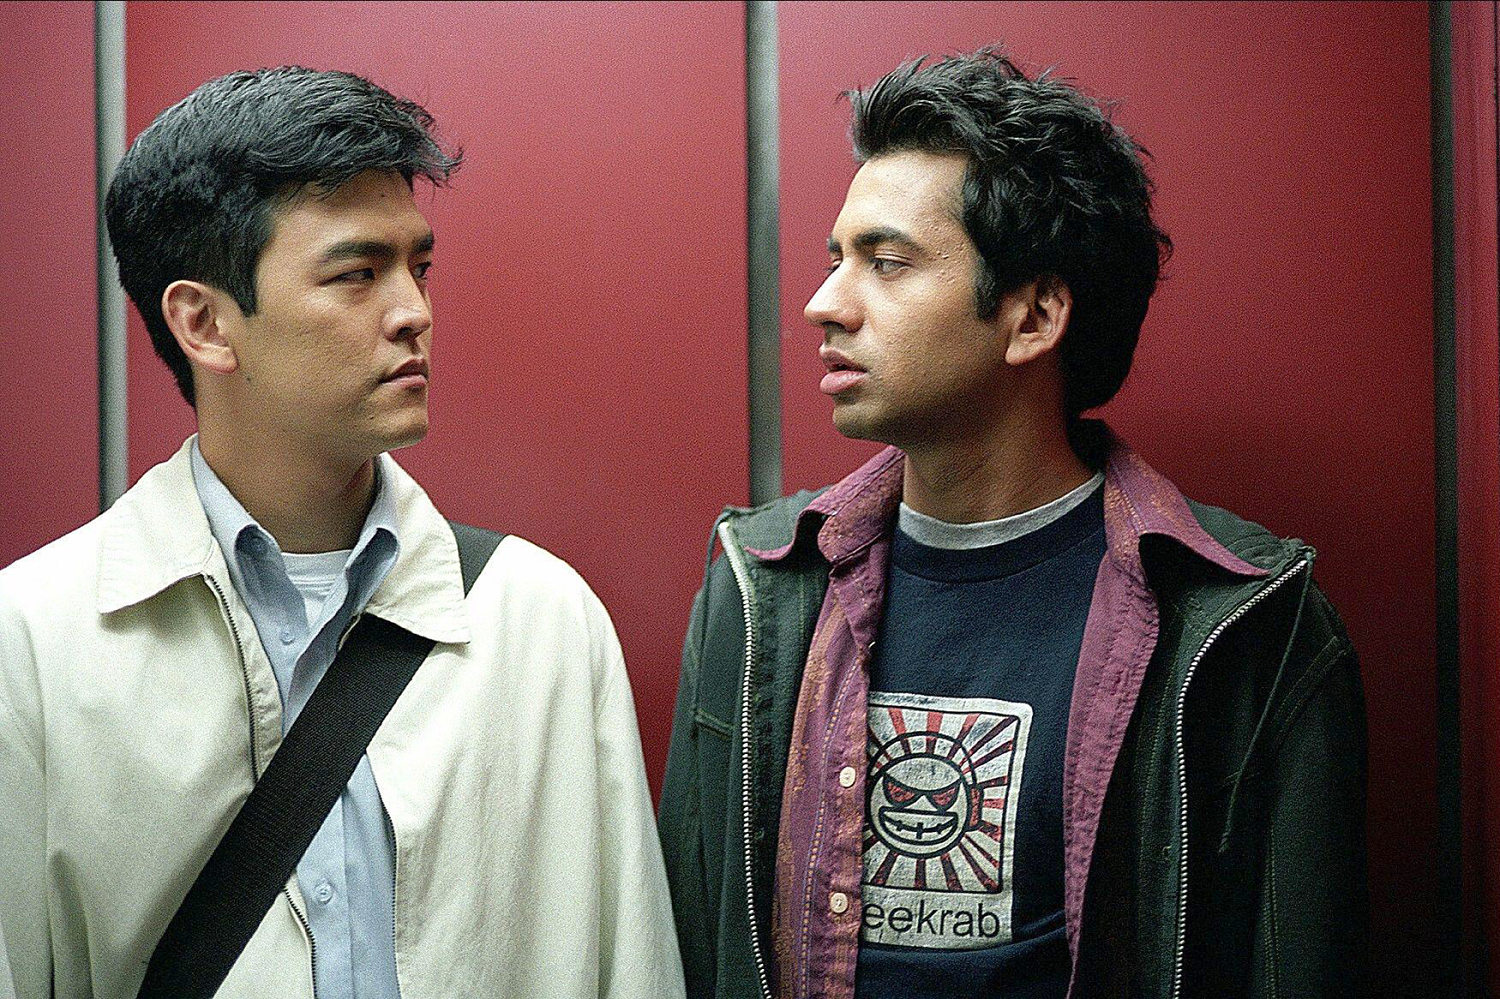 asian americans reflect on how ‘harold & kumar’ helped weed out stereotypes